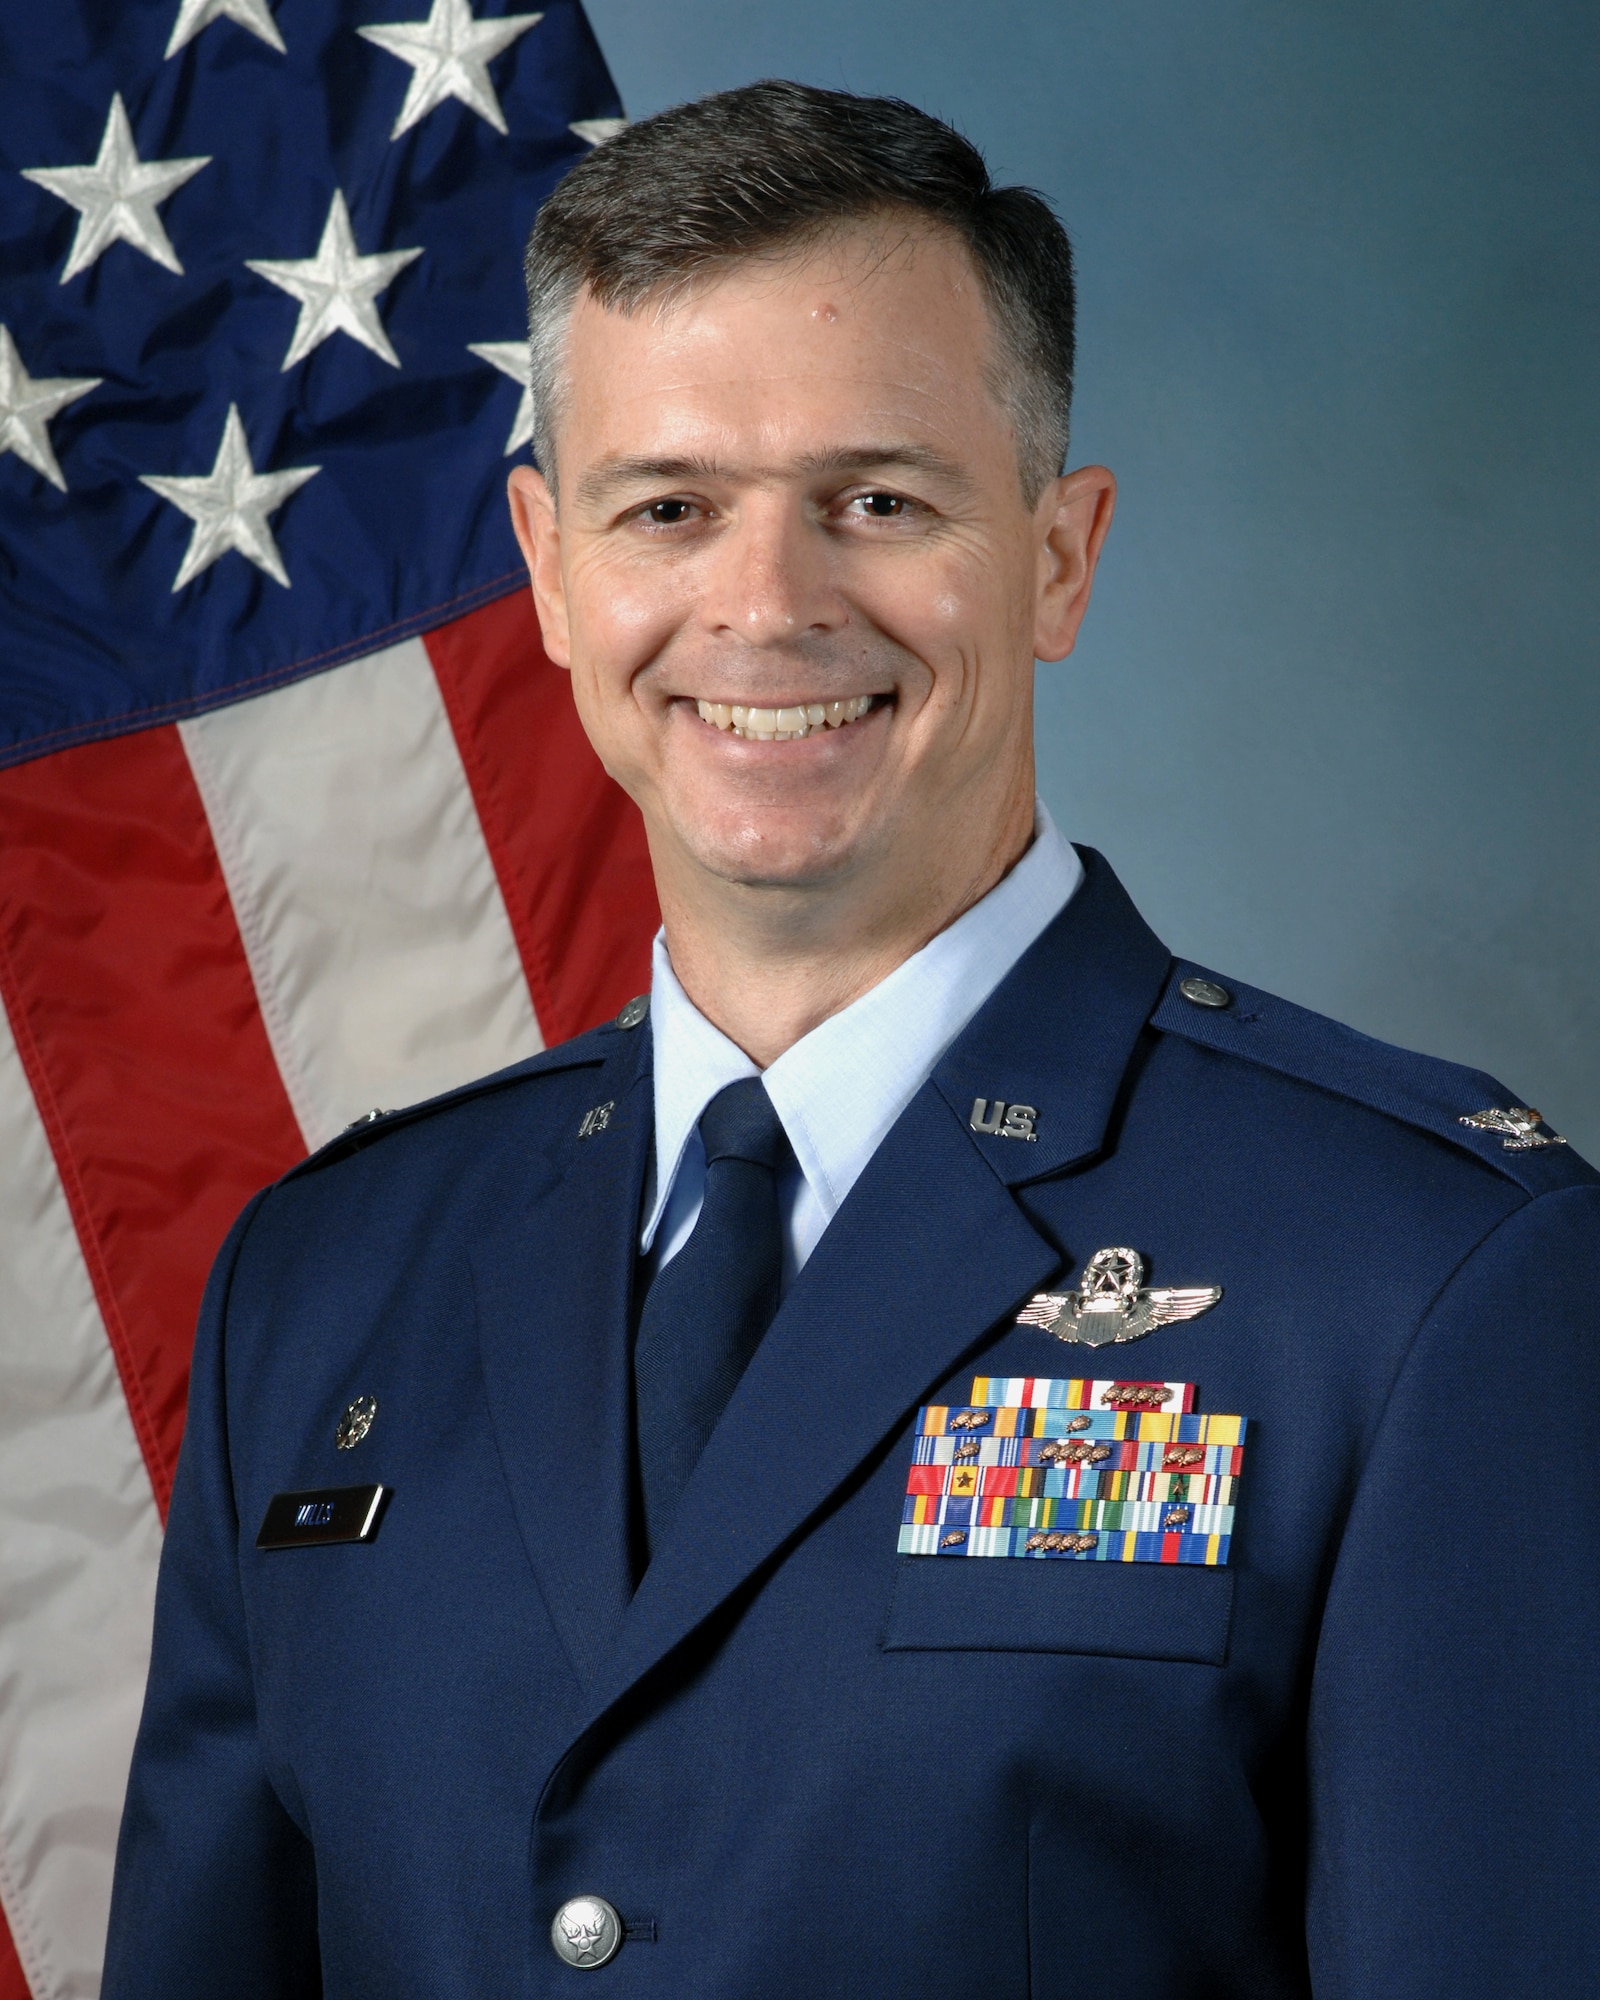 Col. Craig D. Wills is the commander of the 39th Air Base Wing at Incirlik Air Base, Turkey. As commander, Colonel Wills is responsible for approximately 5,000 U.S. military, civilian and contractor personnel and the combat readiness of U.S. Air Force units at Incirlik and two geographically-separated units in Turkey.
